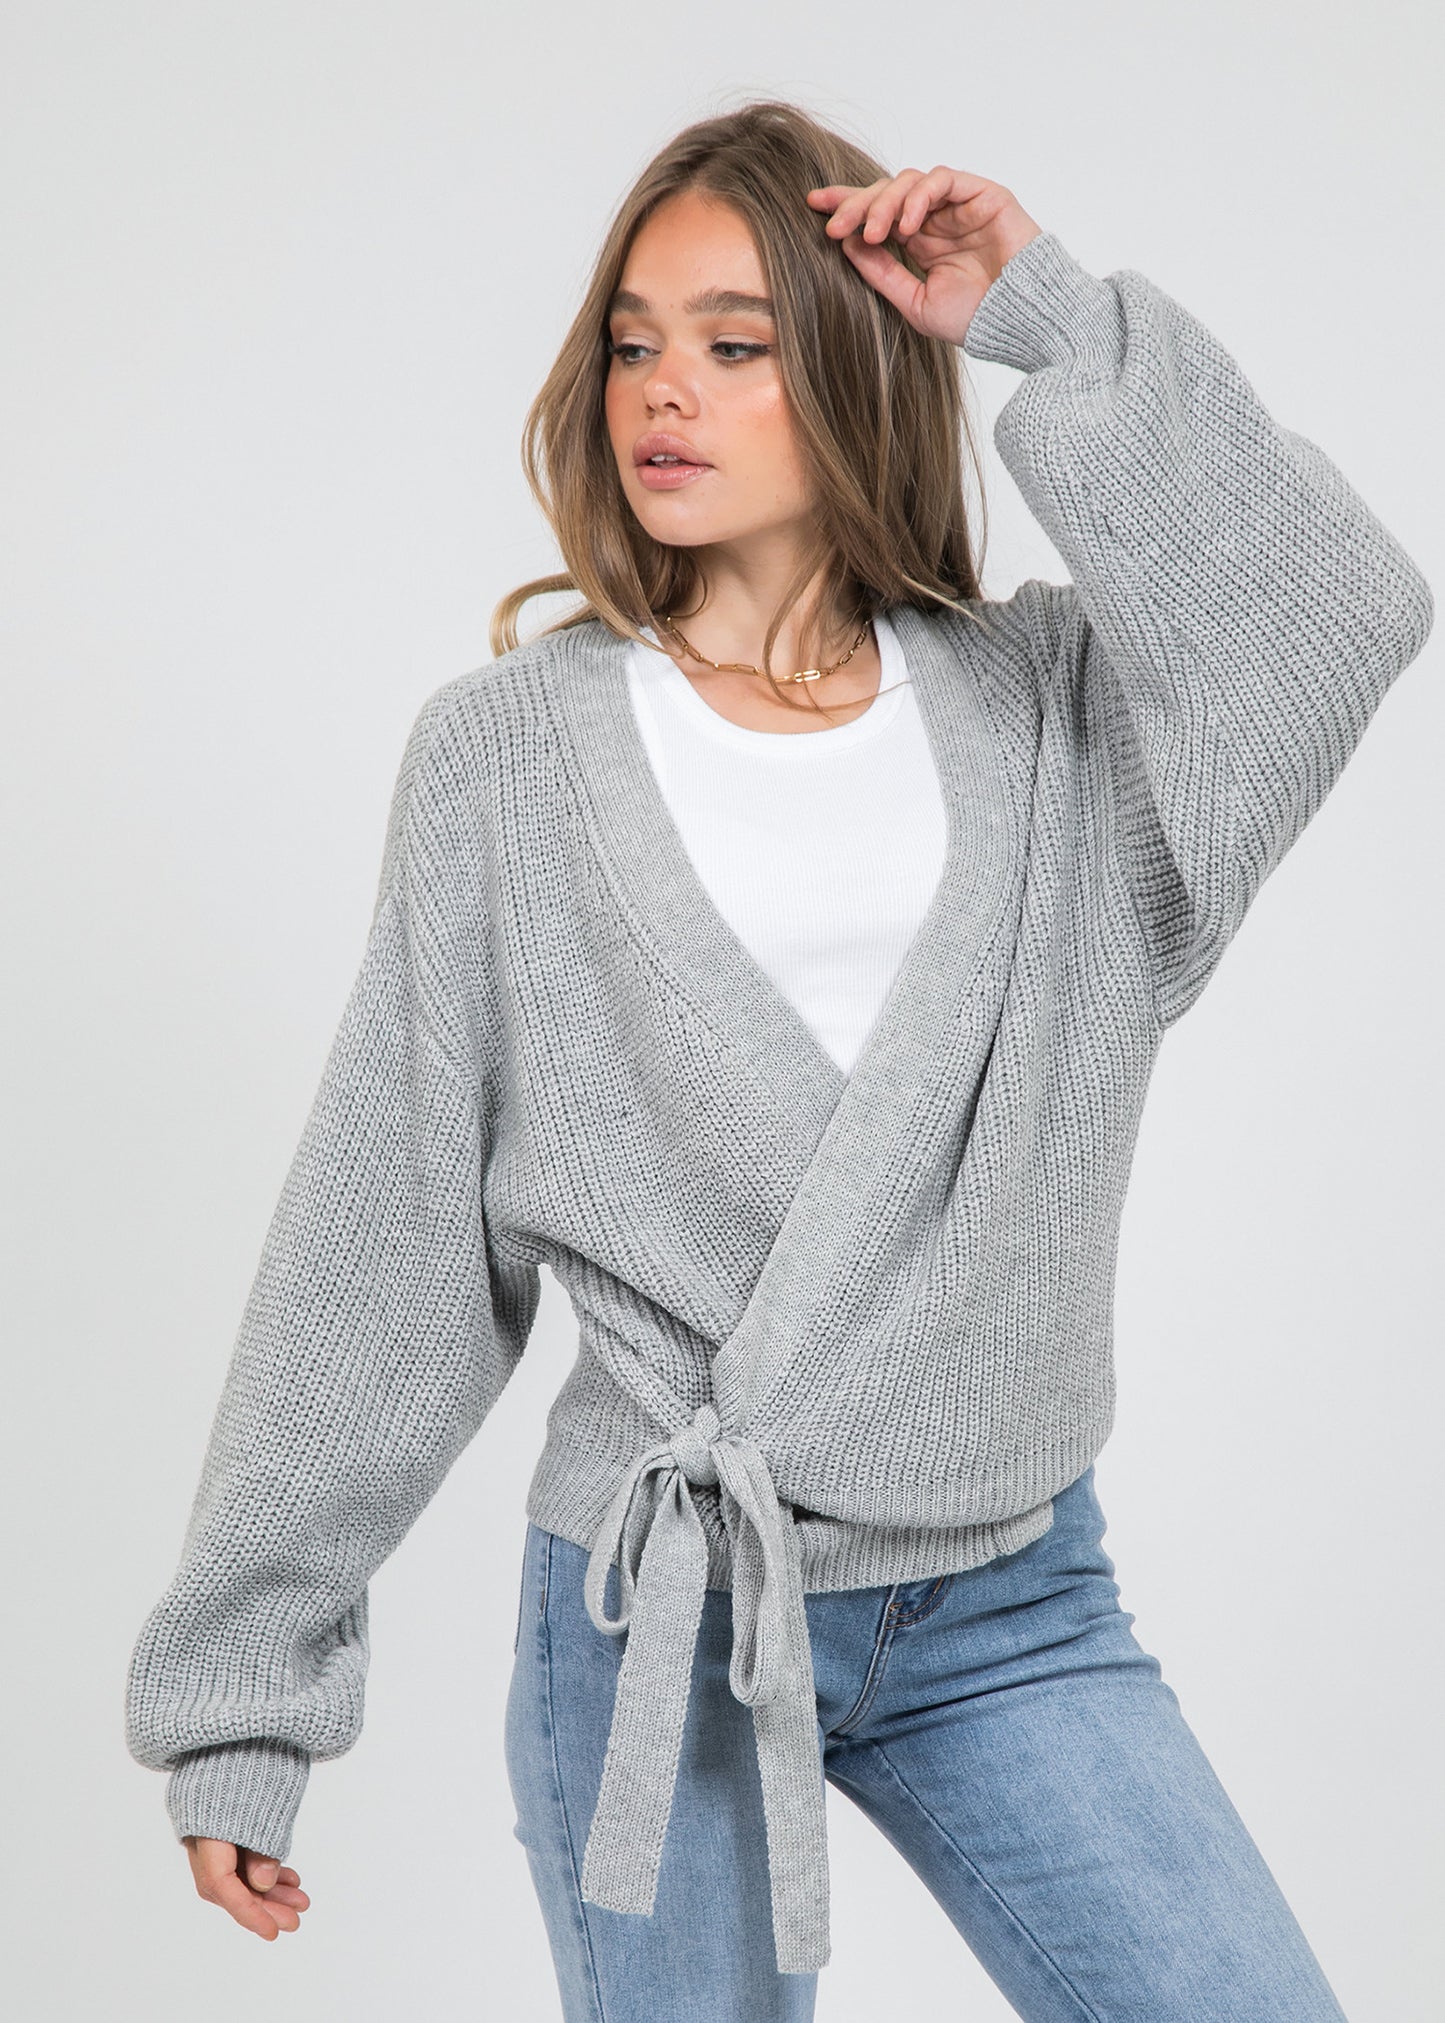 Wrap cardigan with tie front in grey